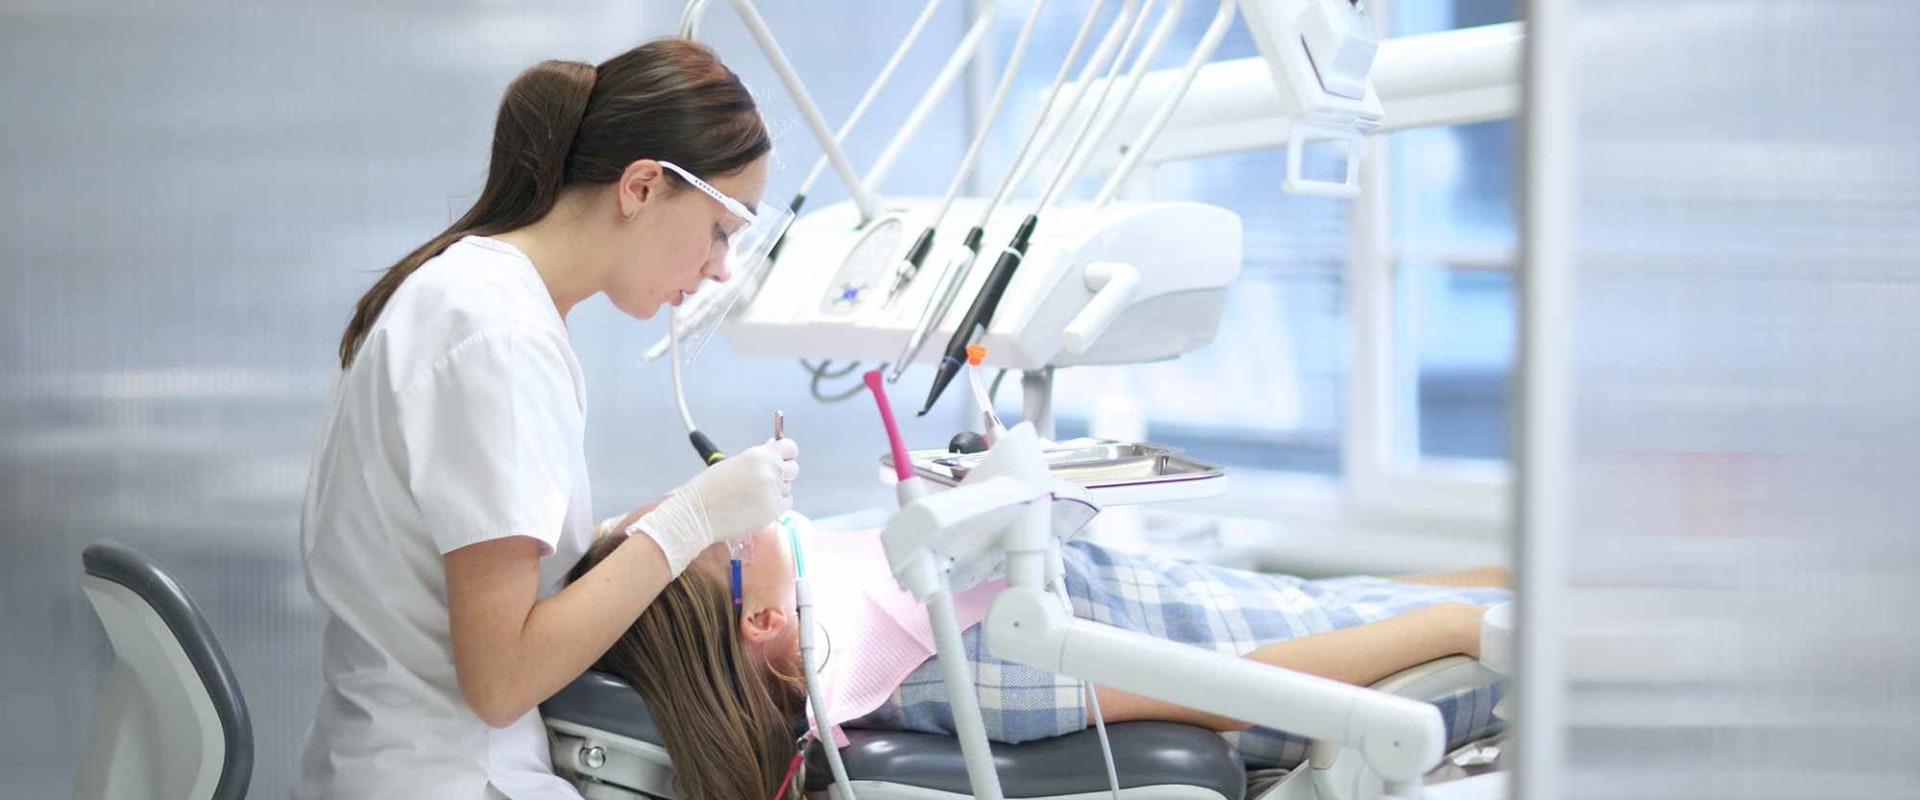 Can oral health therapists do fillings?